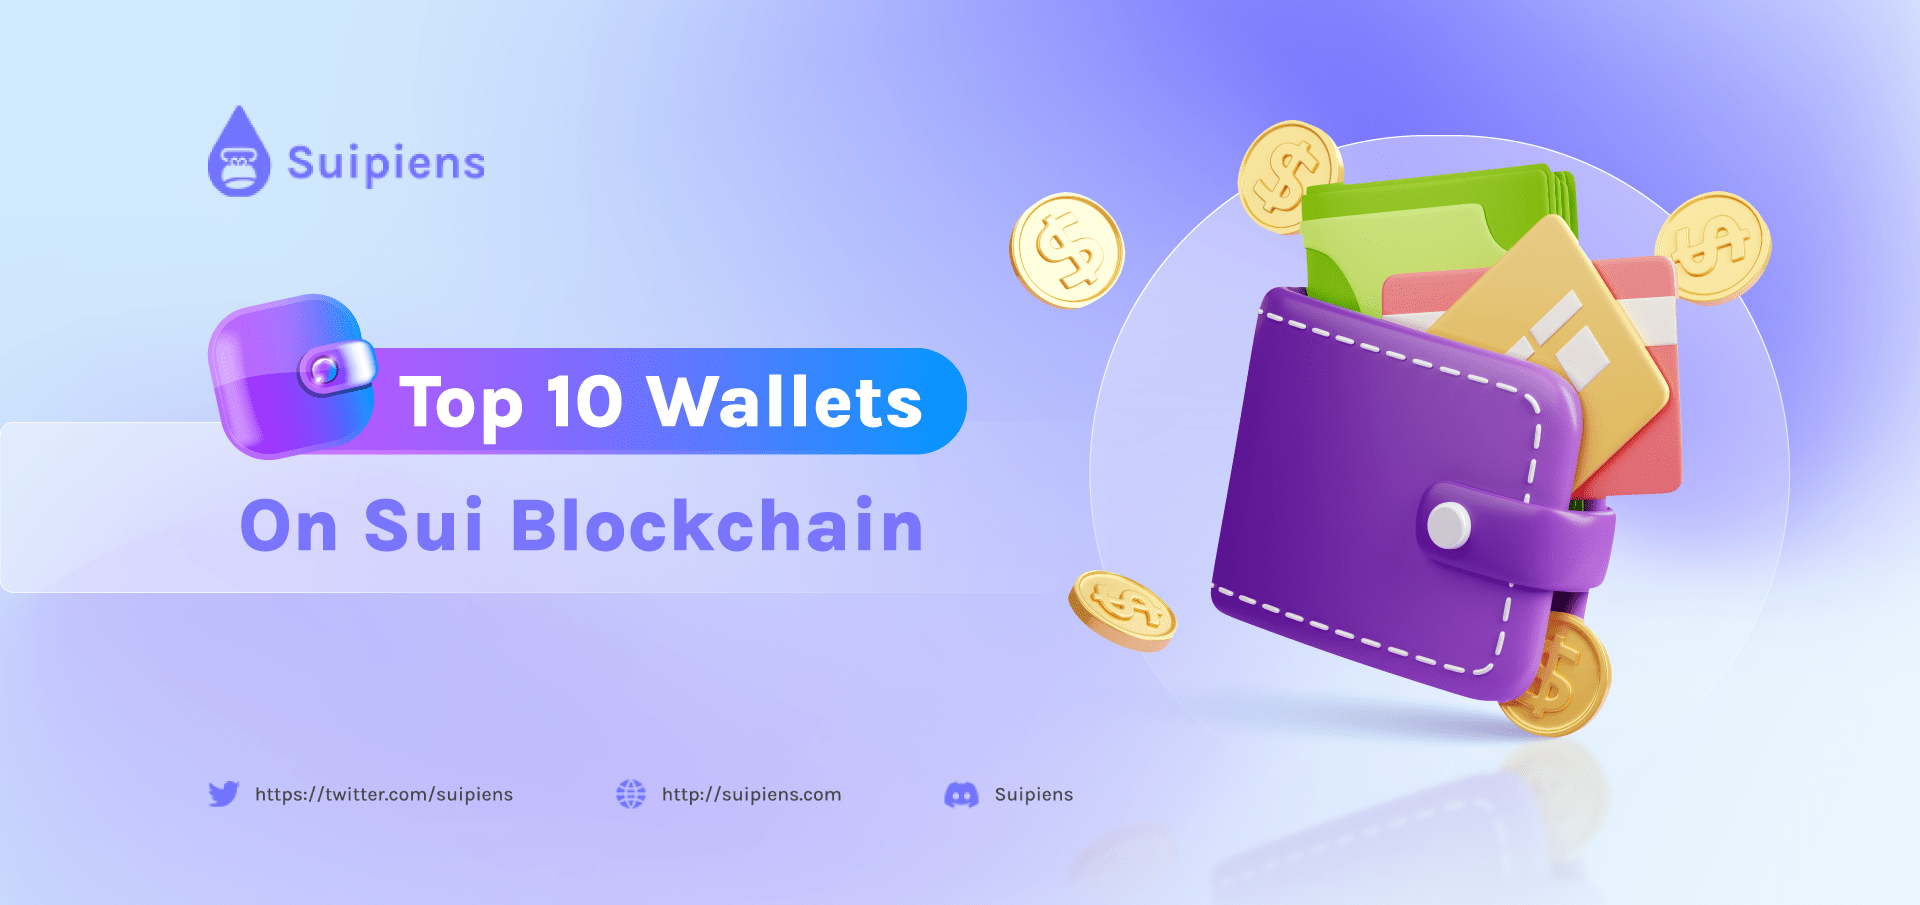 Top 10 Wallets On Sui Blockchain